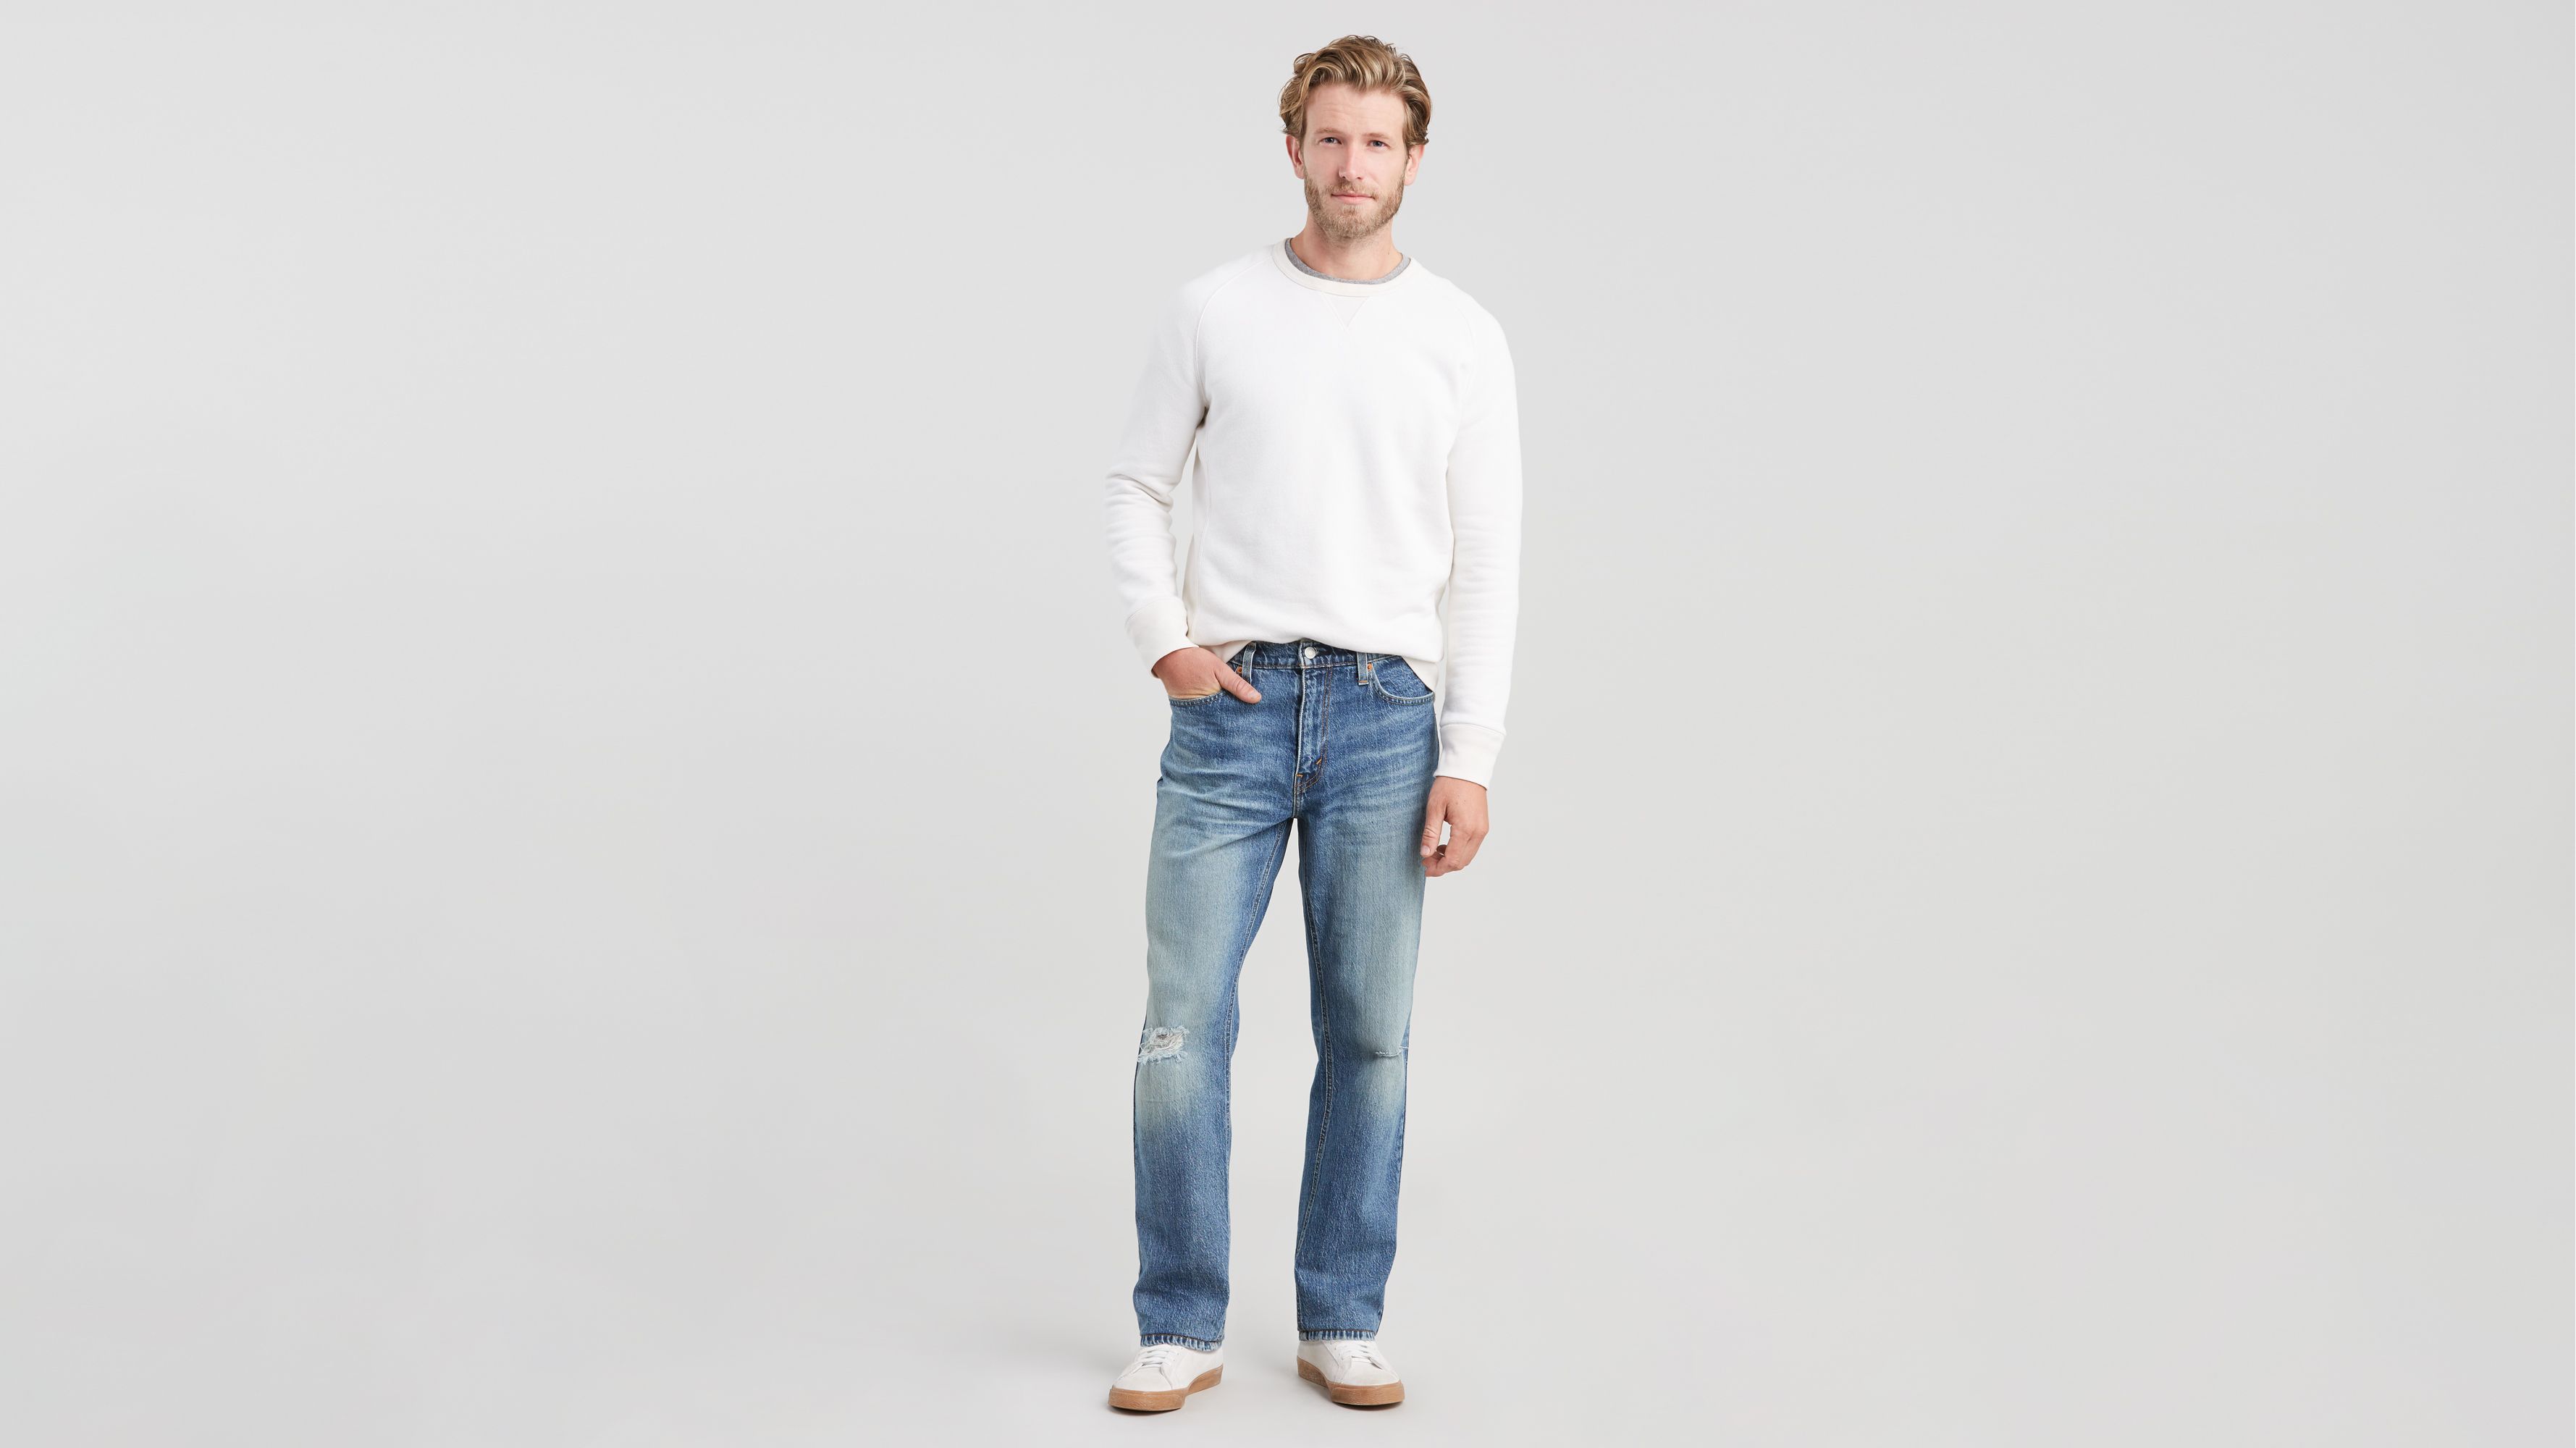 Ripped Jeans For Men - Men's Distressed Jeans | Levi’s® US